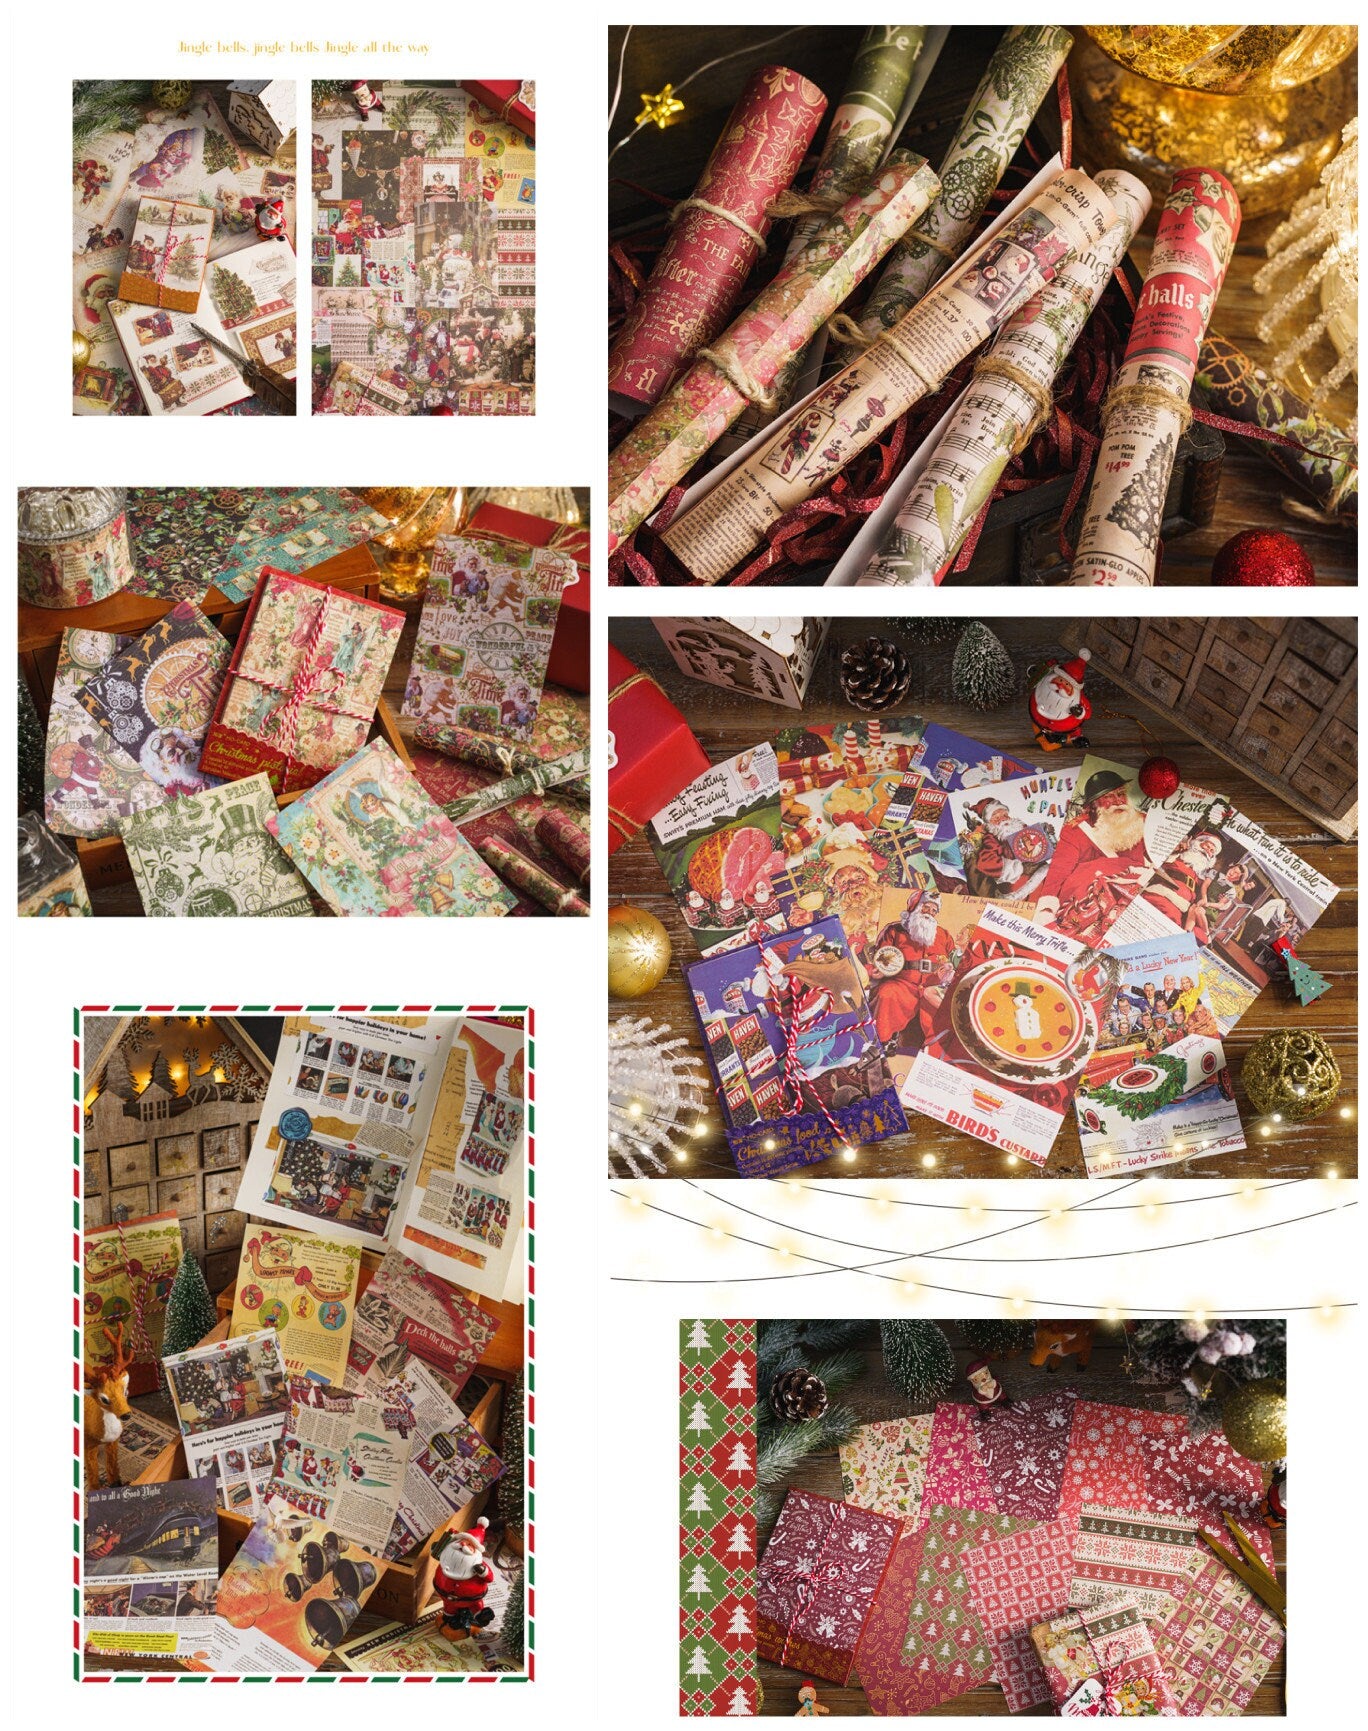 Christmas Jouranling Material Paper Set Retro Scrapbooking Material Paper Kit Gift Packing DIY Decorative Background Paper 8 styles 40 pcs